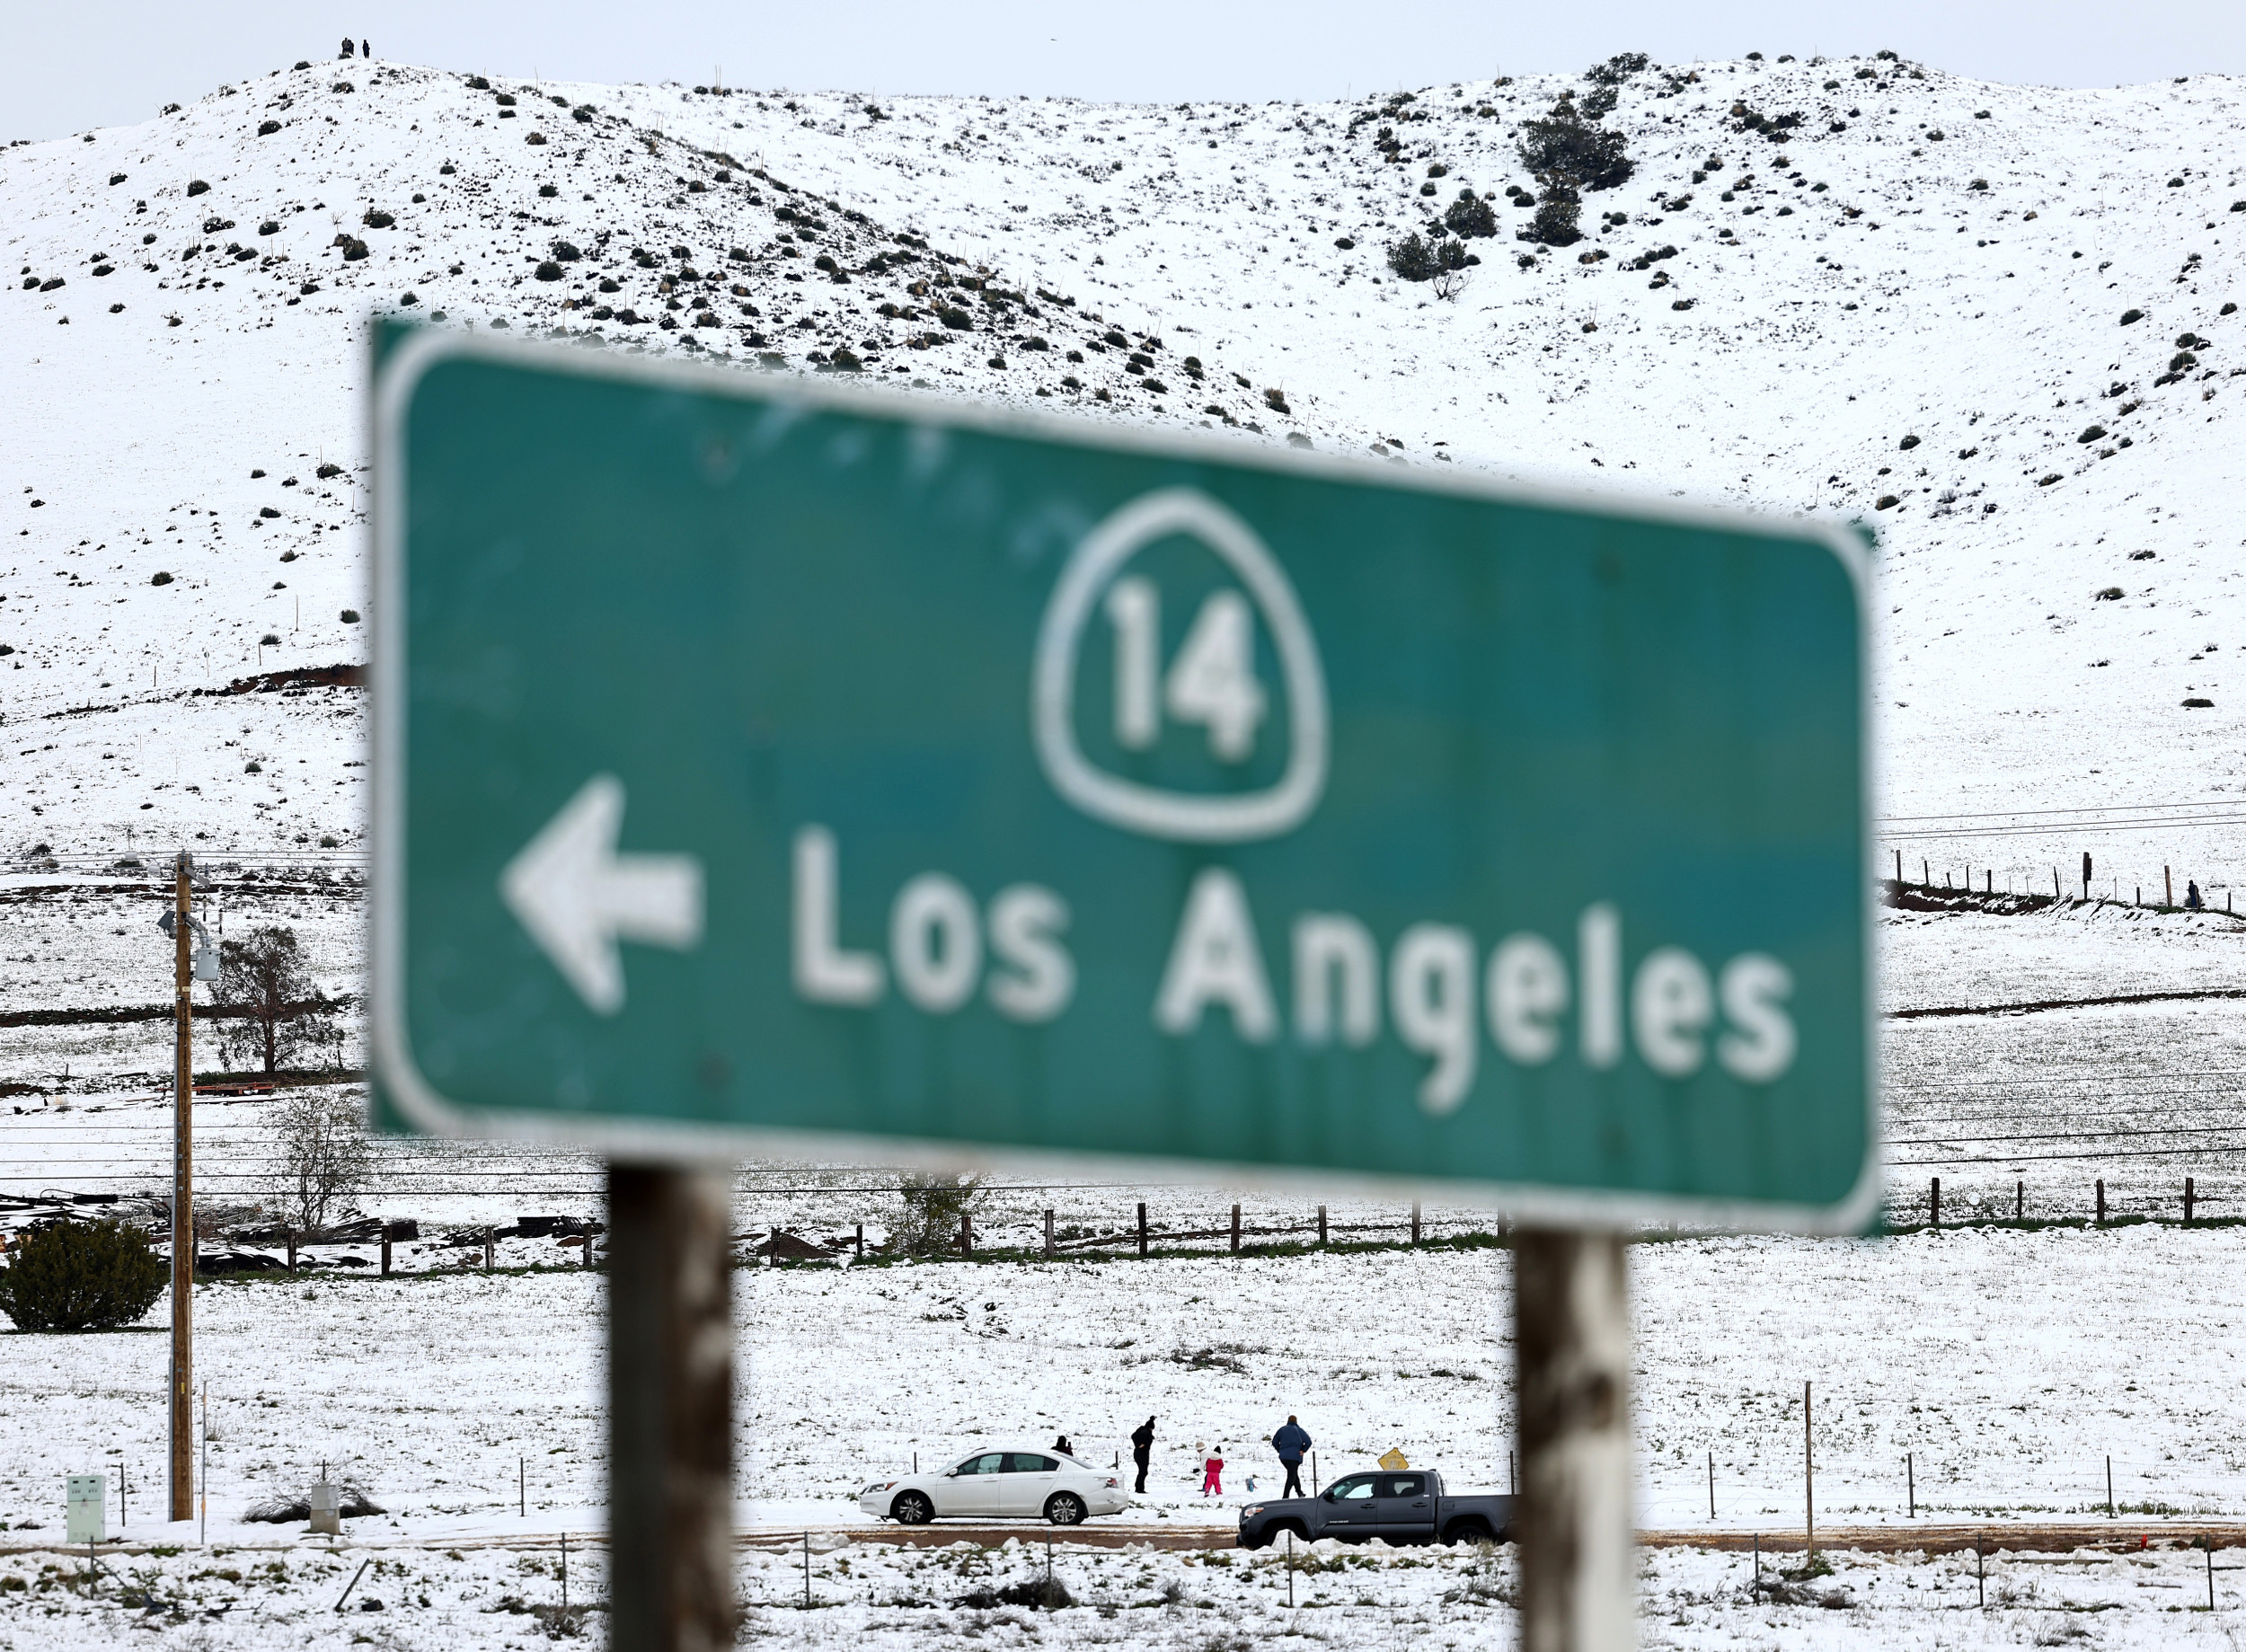 additional winter weather hits west coast